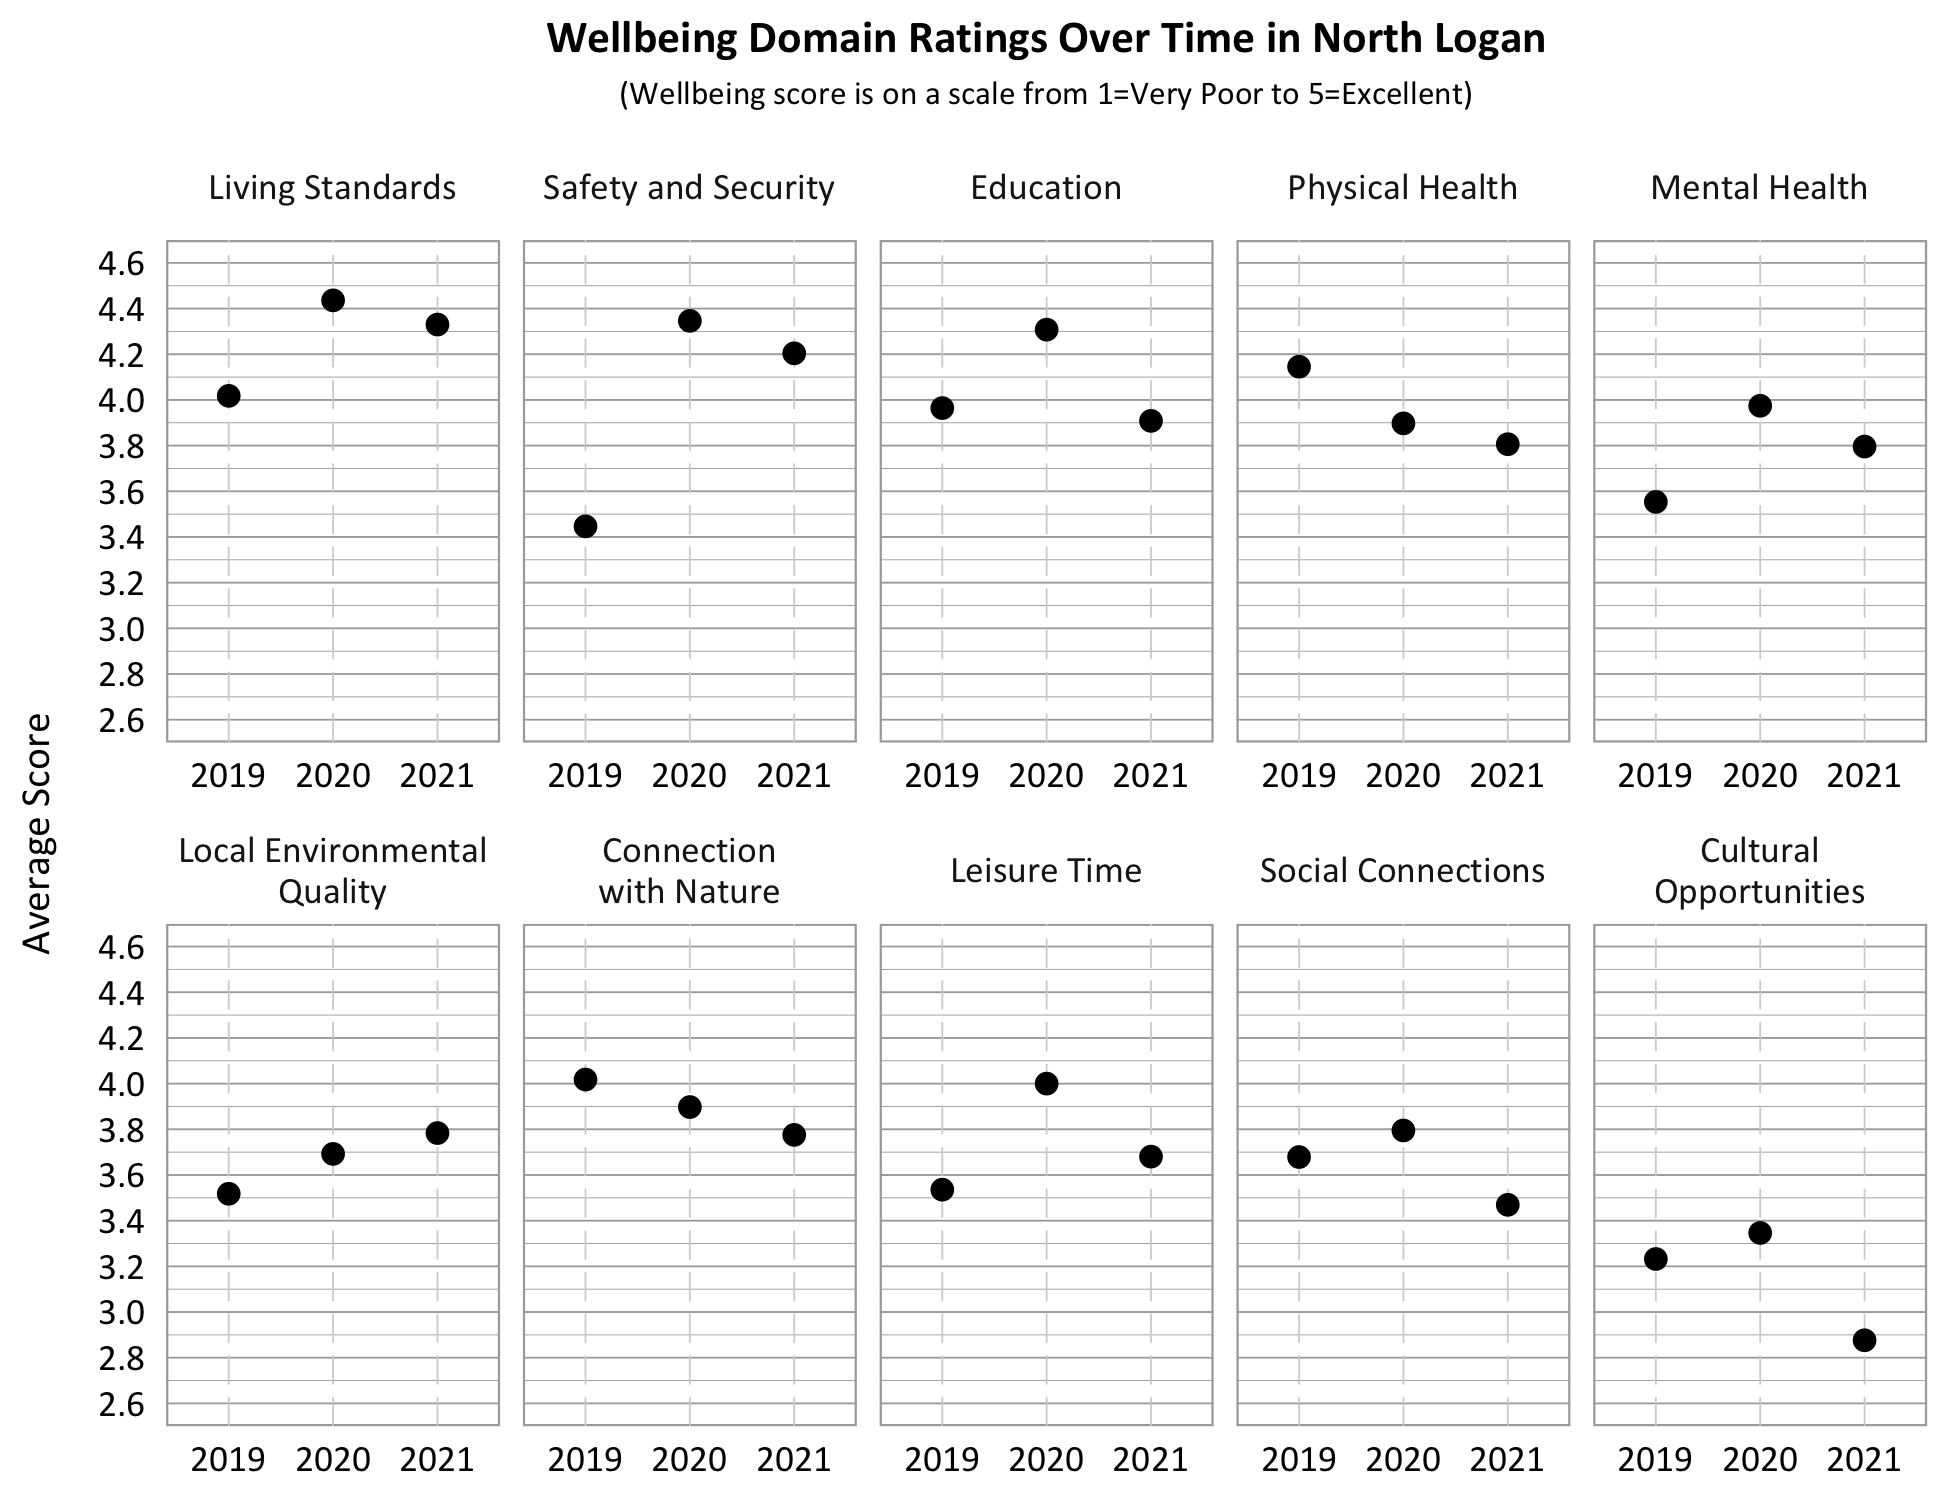 Dot Plot. Title: Wellbeing Domain Overtime in North Logan, Subtitle: Wellbeing score is on a scale from 1=Very Poor to 5=Excellent. Category: Living Standards- 2019- 4.0 2020- 4.45, 2021- 4.35; Category: Safety and security- 2019- 3.45, 2020- 4.35, 2021- 4.2; Category: Connection with Nature- 2019- 4.0, 2020- 3.9, 2021- 3.8, Category: Education- 2019- 3.95, 2020- 4.3, 2021- 3.8; Category: Physical Health 2019- 4.15, 2020- 3.9, 2021 3.8; Category: Mental Health- 2019- 3.55, 2020- 4.0, 2021- 3.8; Category: Local Environmental Quality- 2019- 3.5, 2020- 3.7, 2021- 3.8; Category: Leisure Time- 2019- 3.55, 2020- 4.0, 2021- 3.7, Category: Social Connection- 2019- 3.7, 2020- 3.8; 2021- 3.5, Category: Cultural Opportunities- 2019-3.2, 2020- 3.35 , 2021- 2.9. 